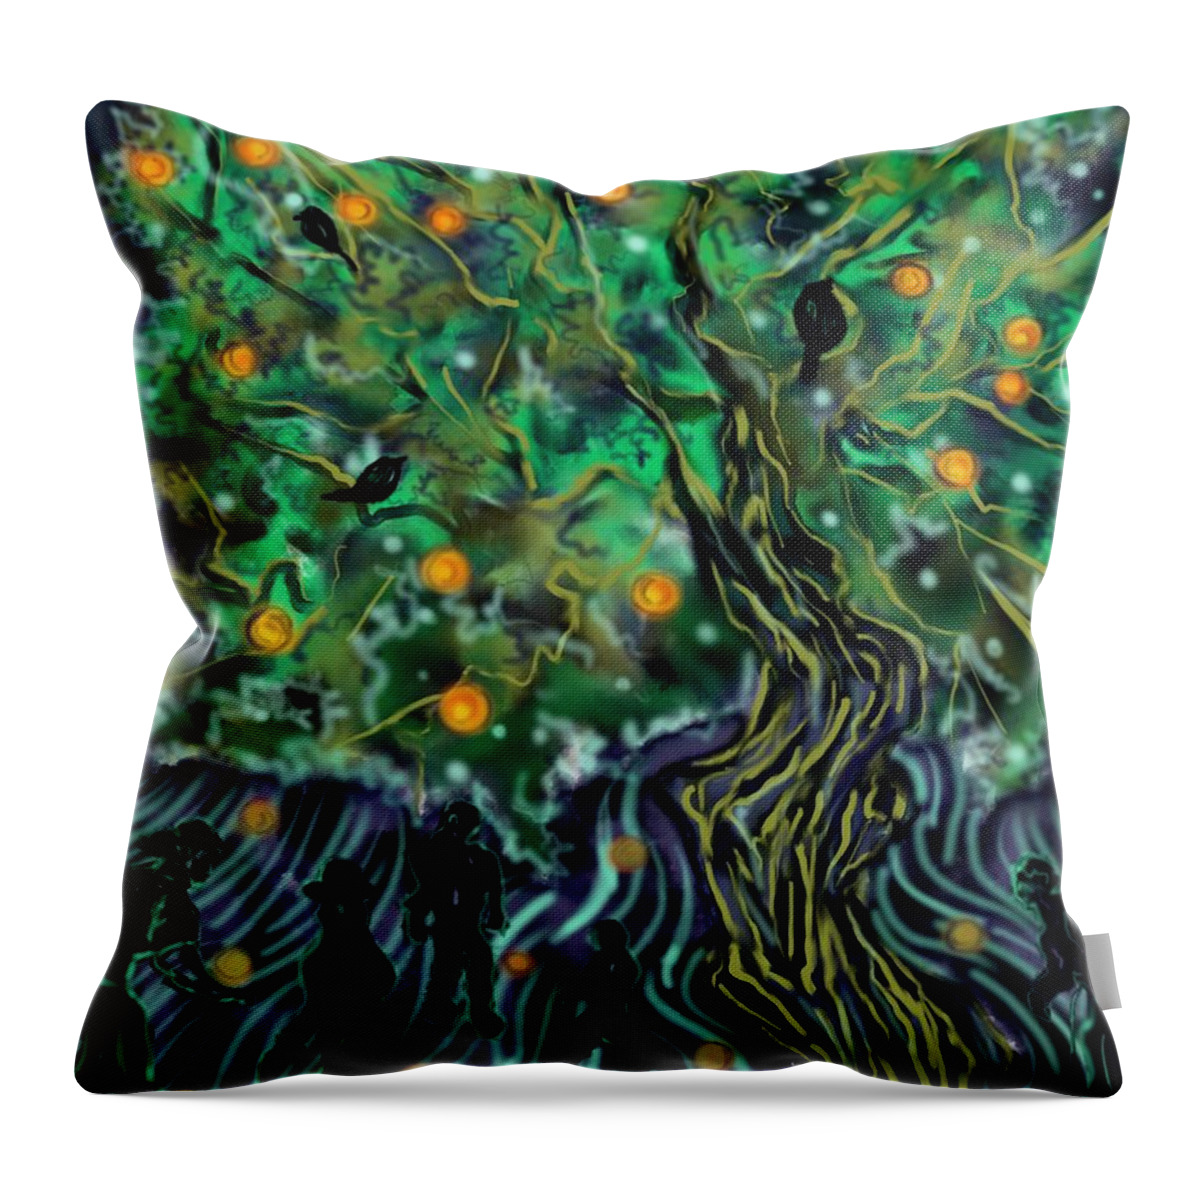 Night Throw Pillow featuring the digital art Night Harvest by Angela Weddle